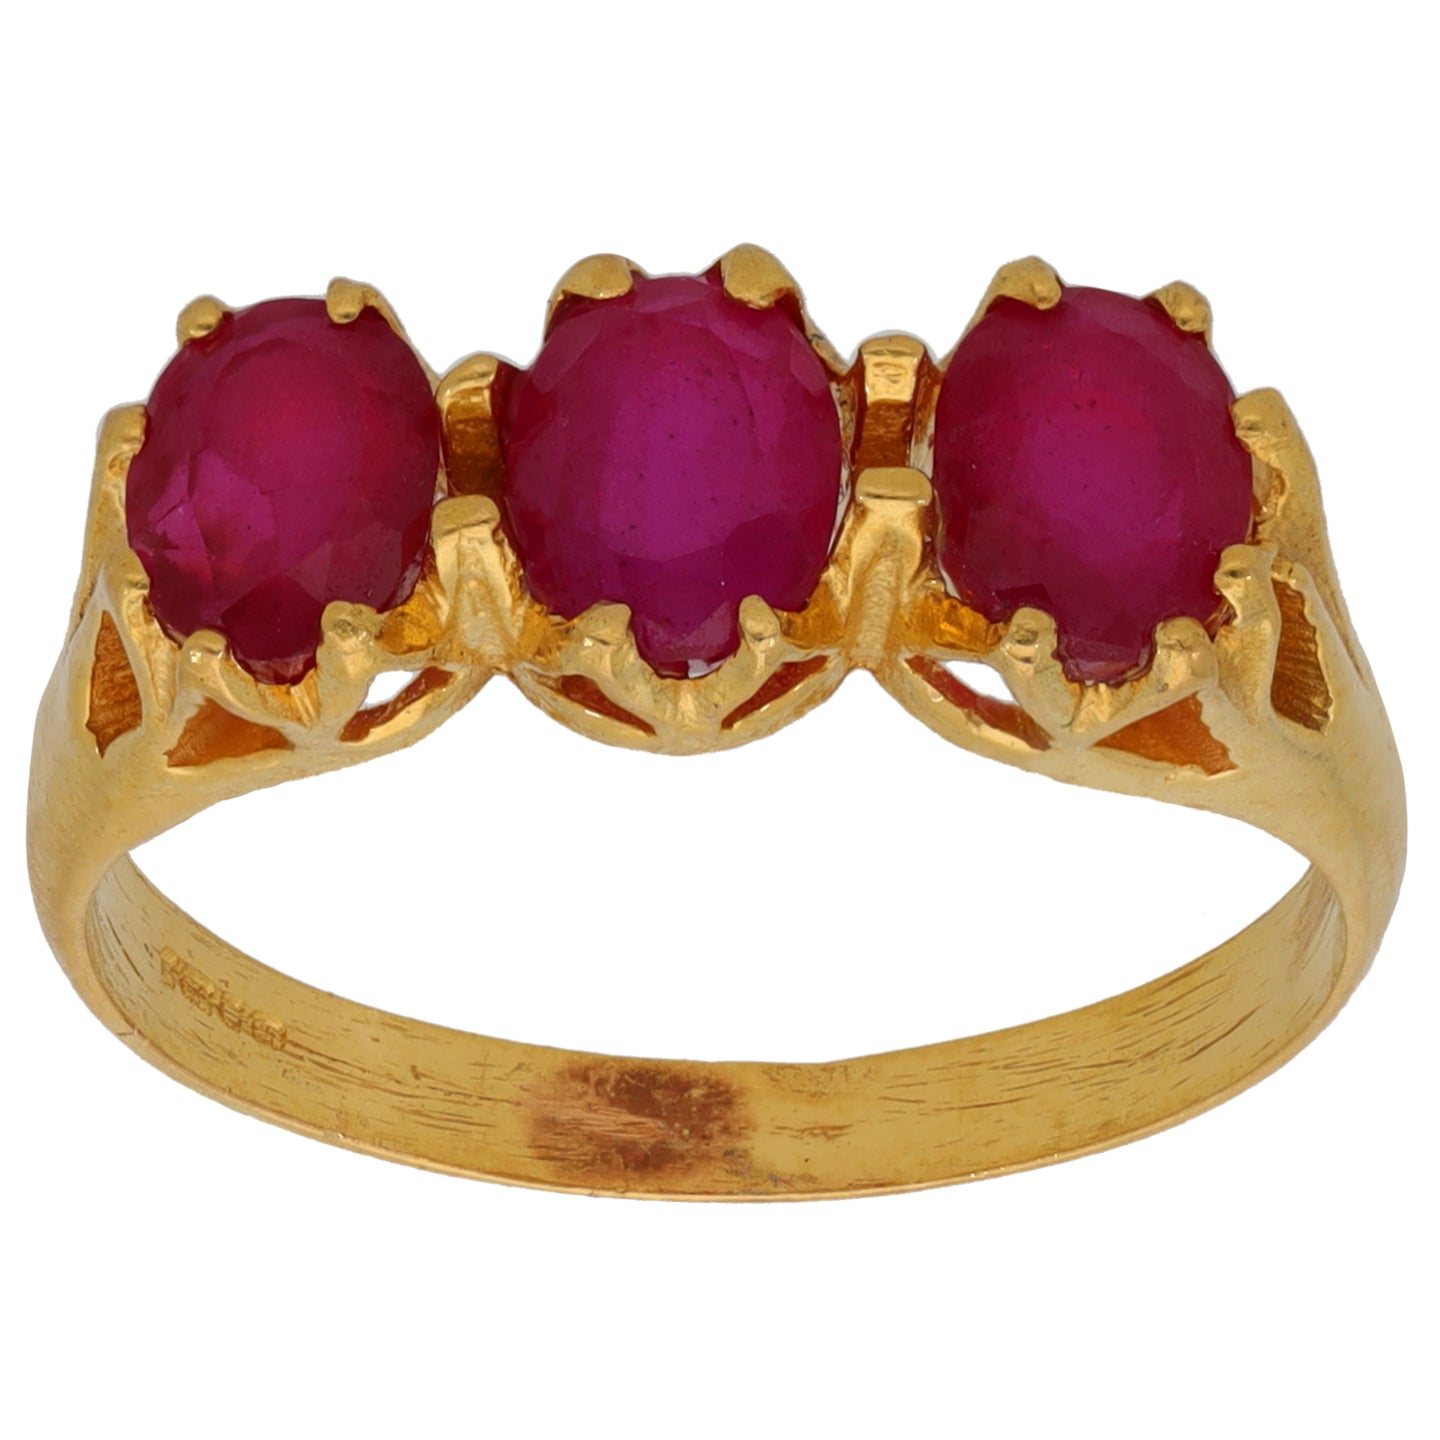 22ct Gold Glass Filled Ruby Trilogy Ring Size P